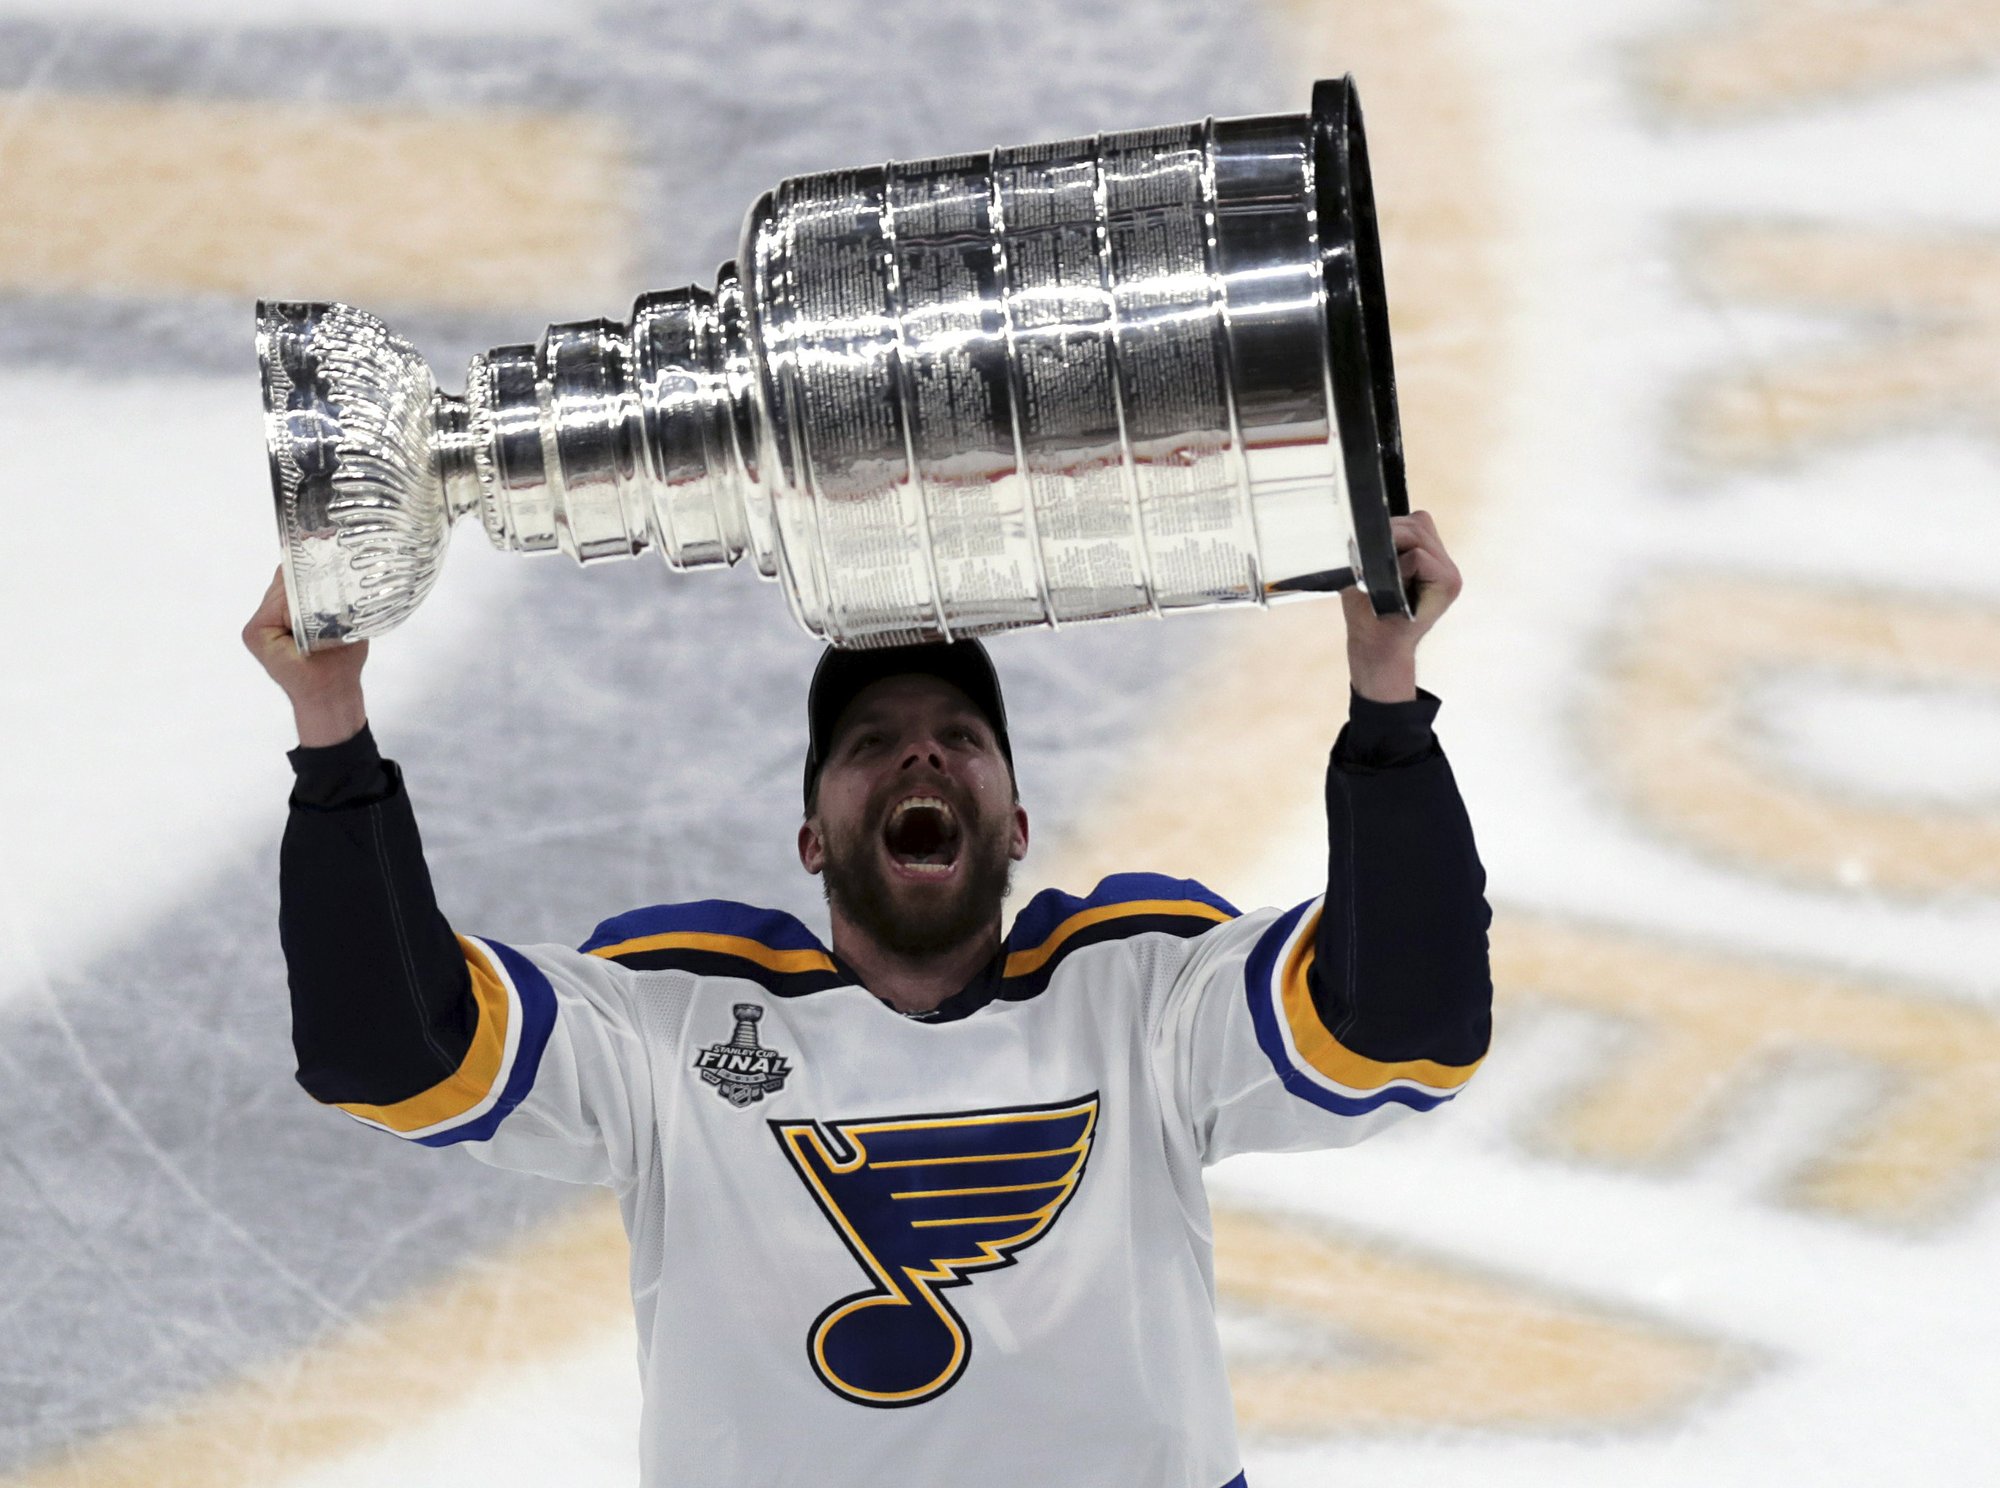 Blues win 1st Stanley Cup, beating Bruins 4-1